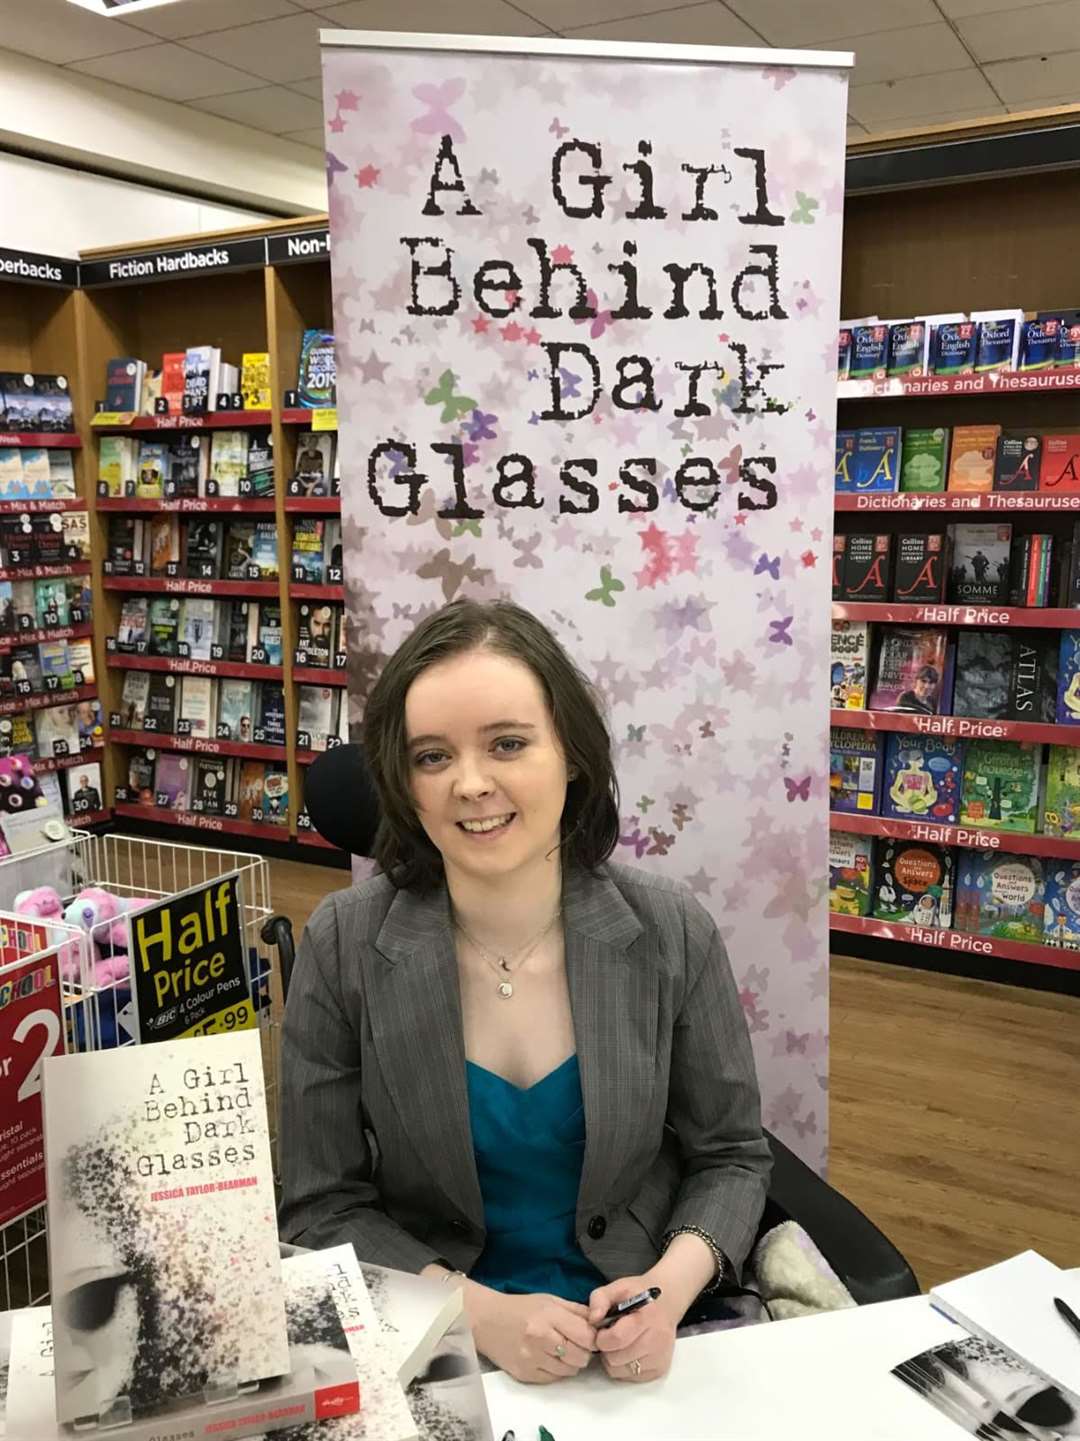 Jessica-Taylor Bearman is an award-winning author after her book A Girl Behind Dark Glasses won at the People's Book Prize